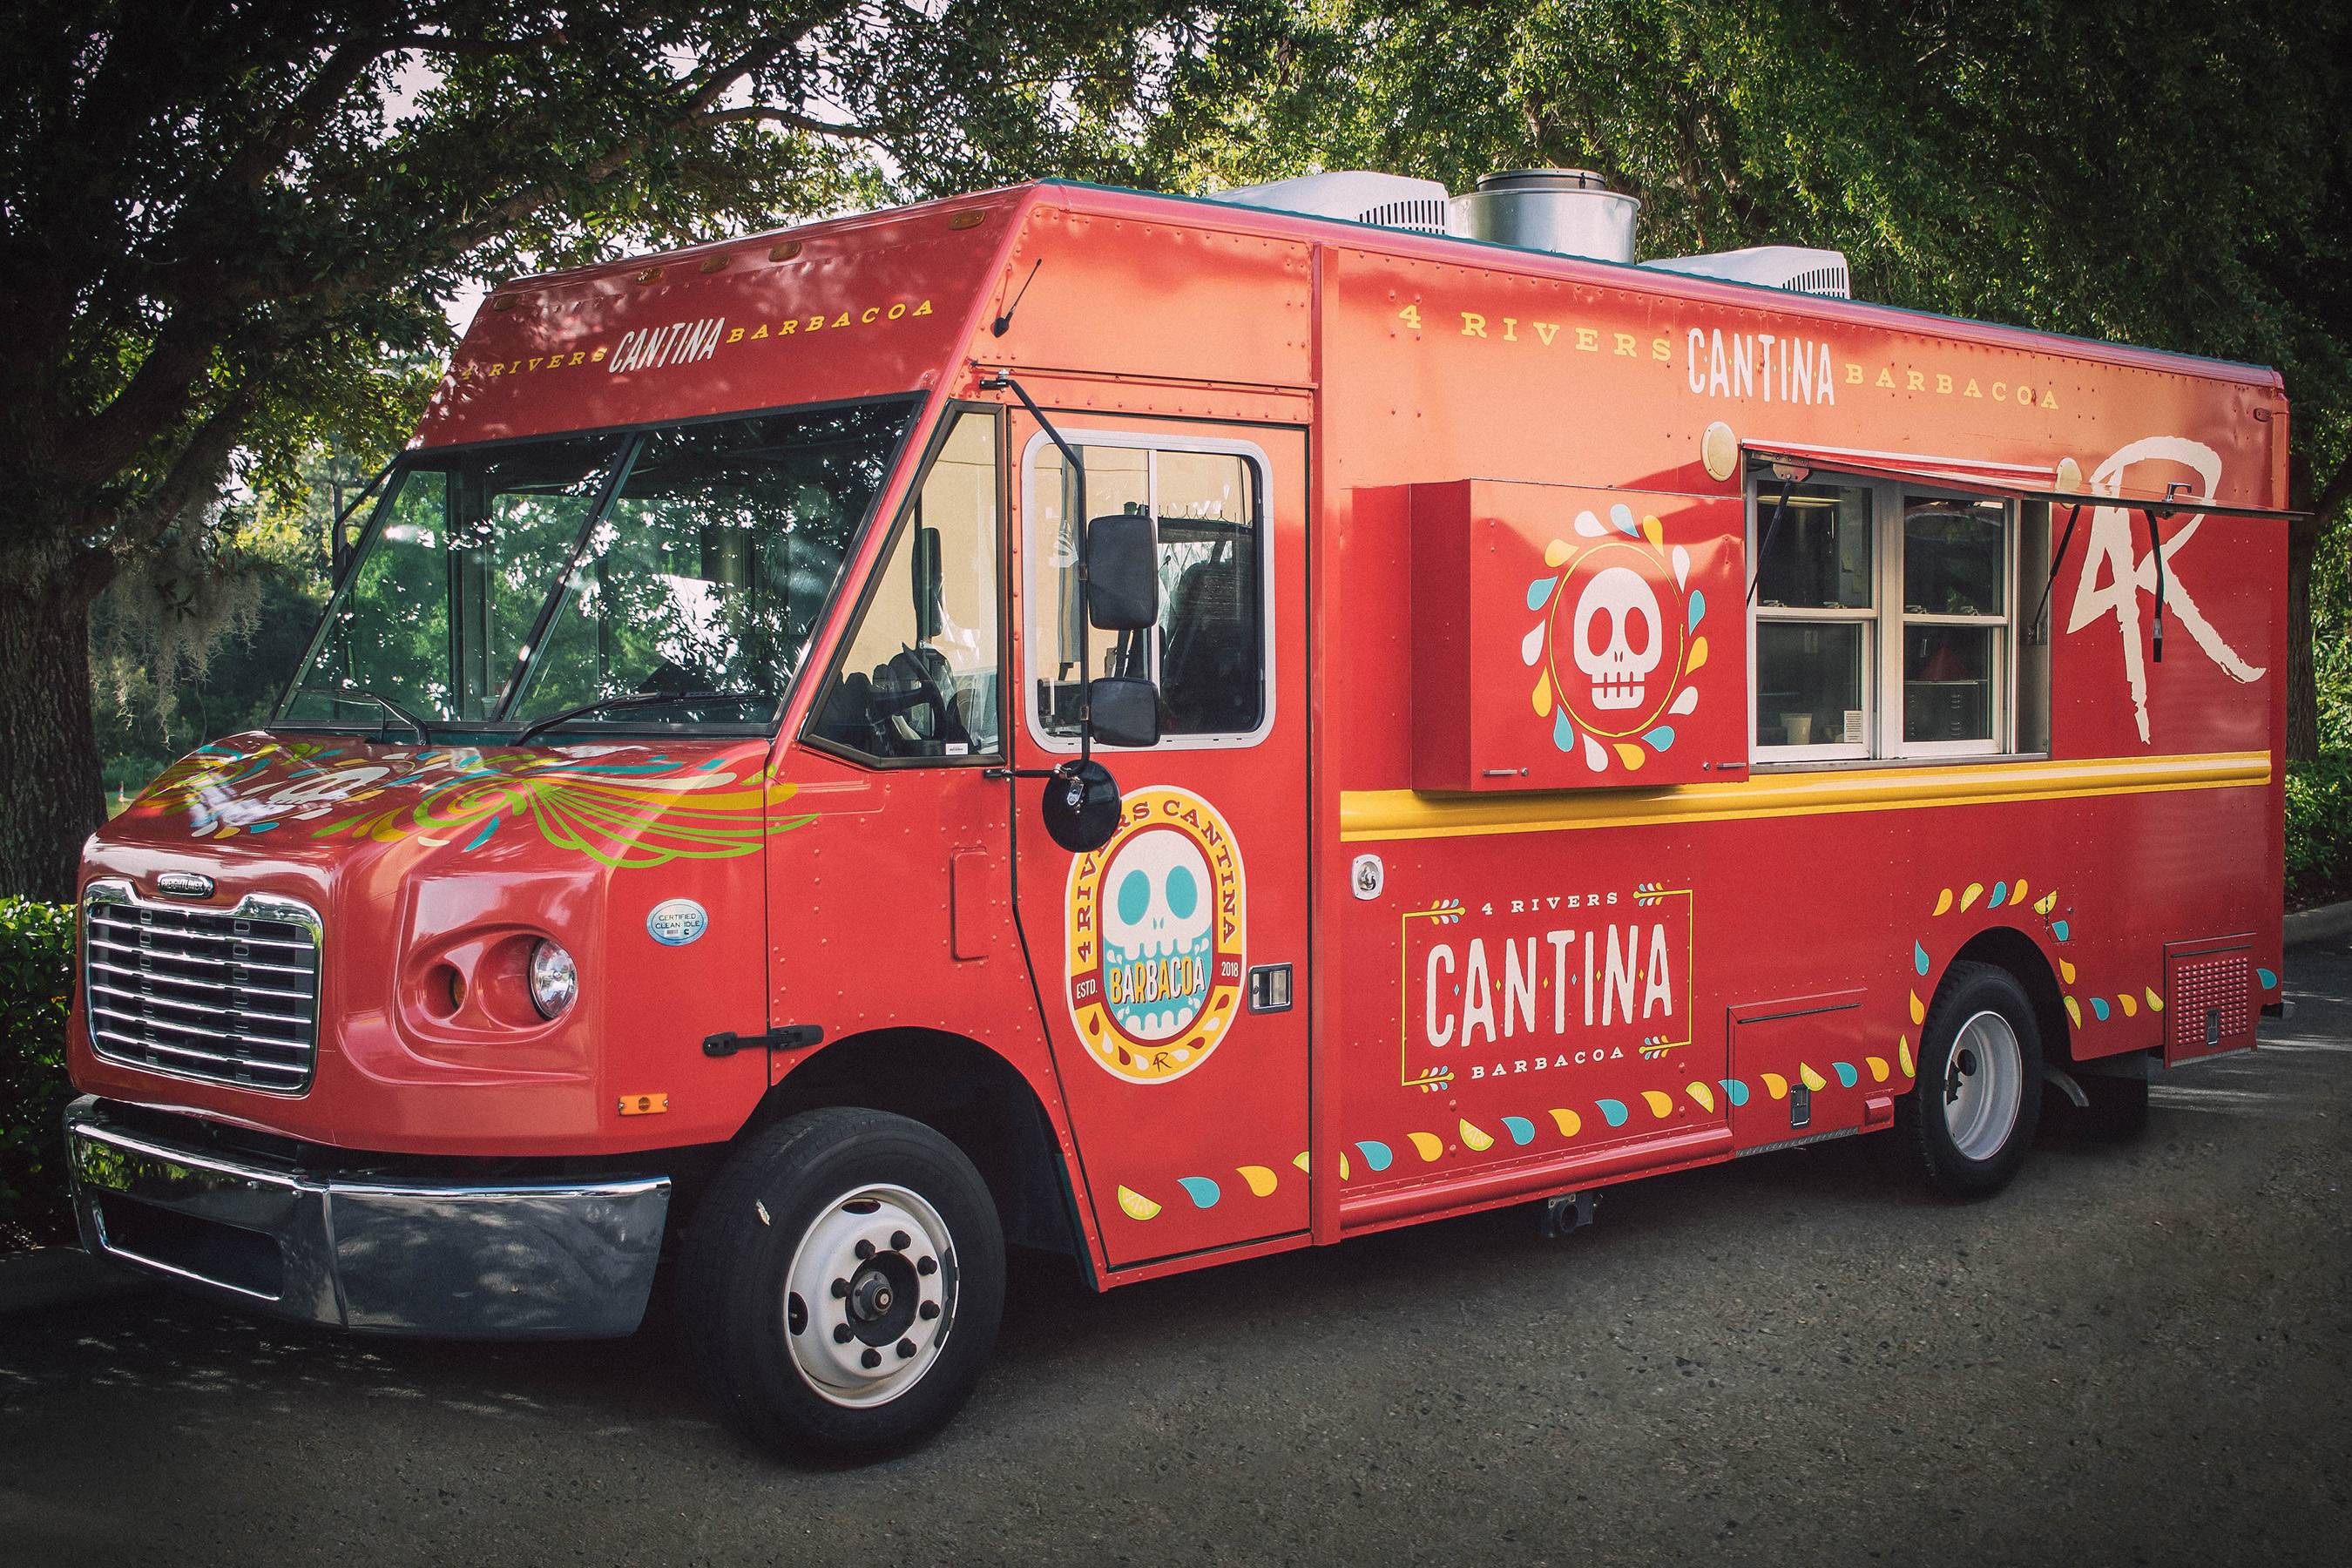 4R Cantina Barbacoa Food Truck opens today at Disney Springs